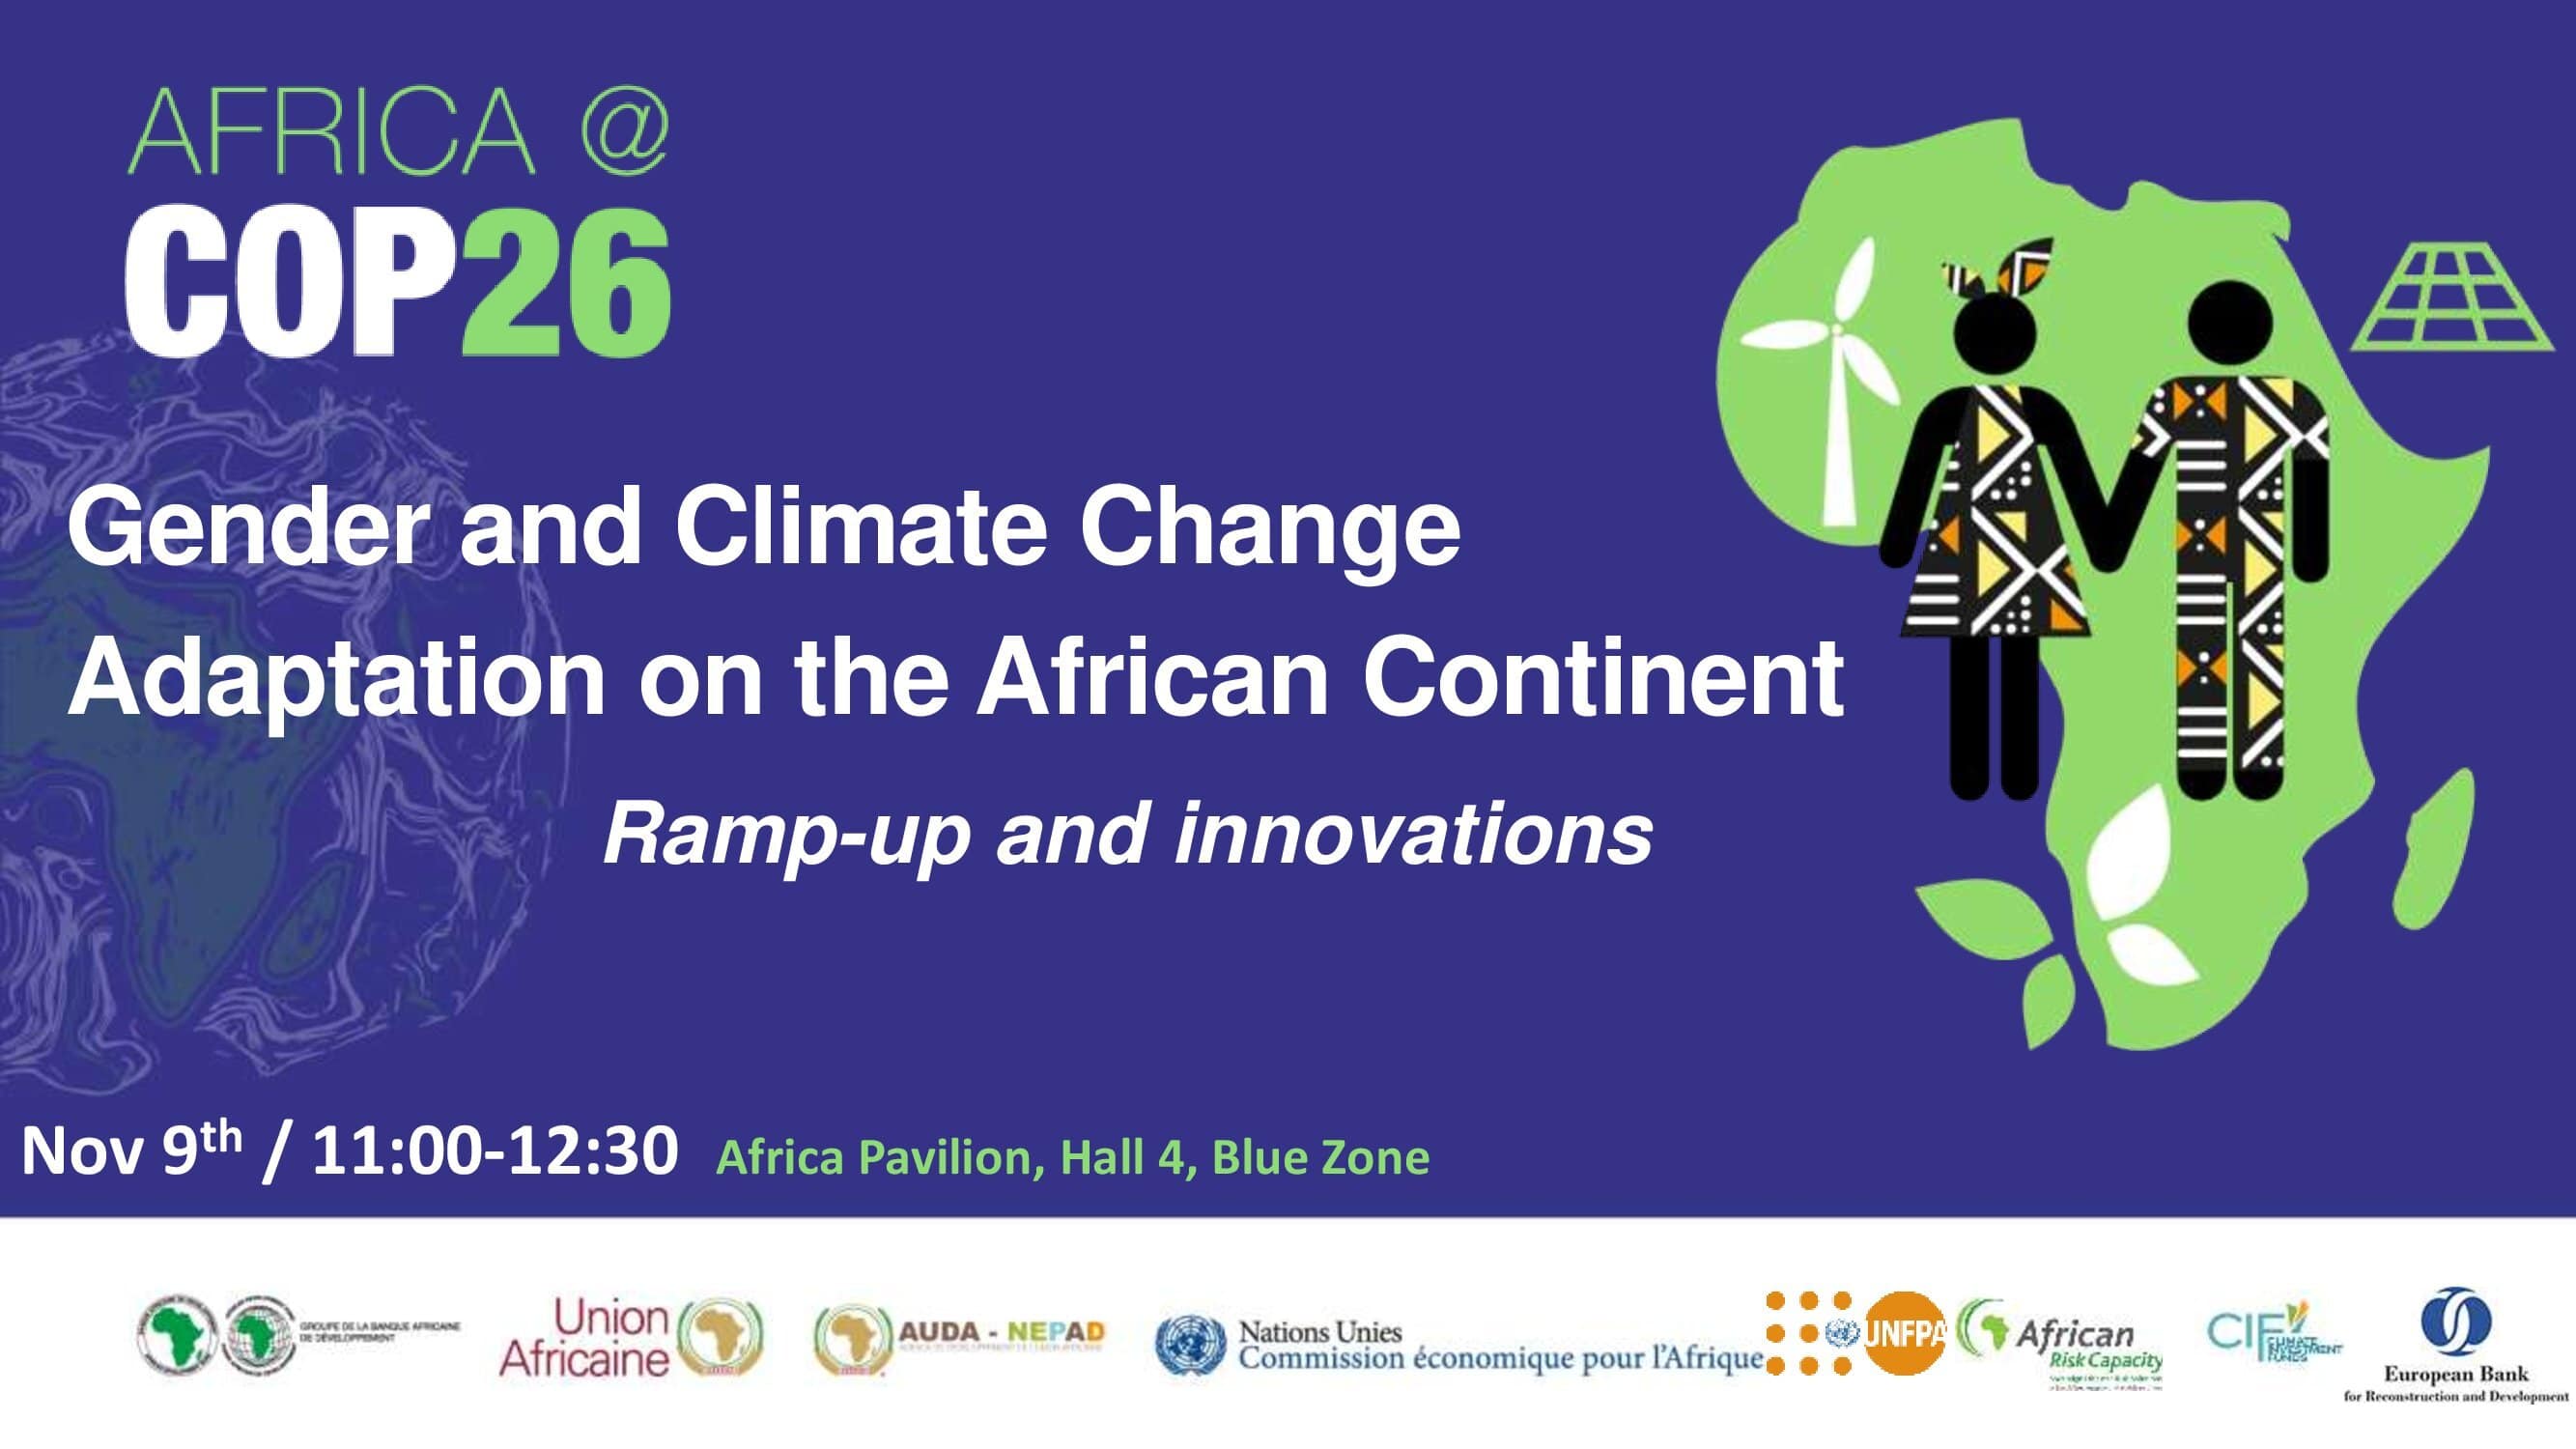 The objective of the event is to present women as active agents of change at different levels of the adaptation process in climate actions. The AfDB will present the conclusions and recommendations of gender-responsive case studies in the agriculture sector as well as related to the identification of gender and climate hotspots in Africa. 